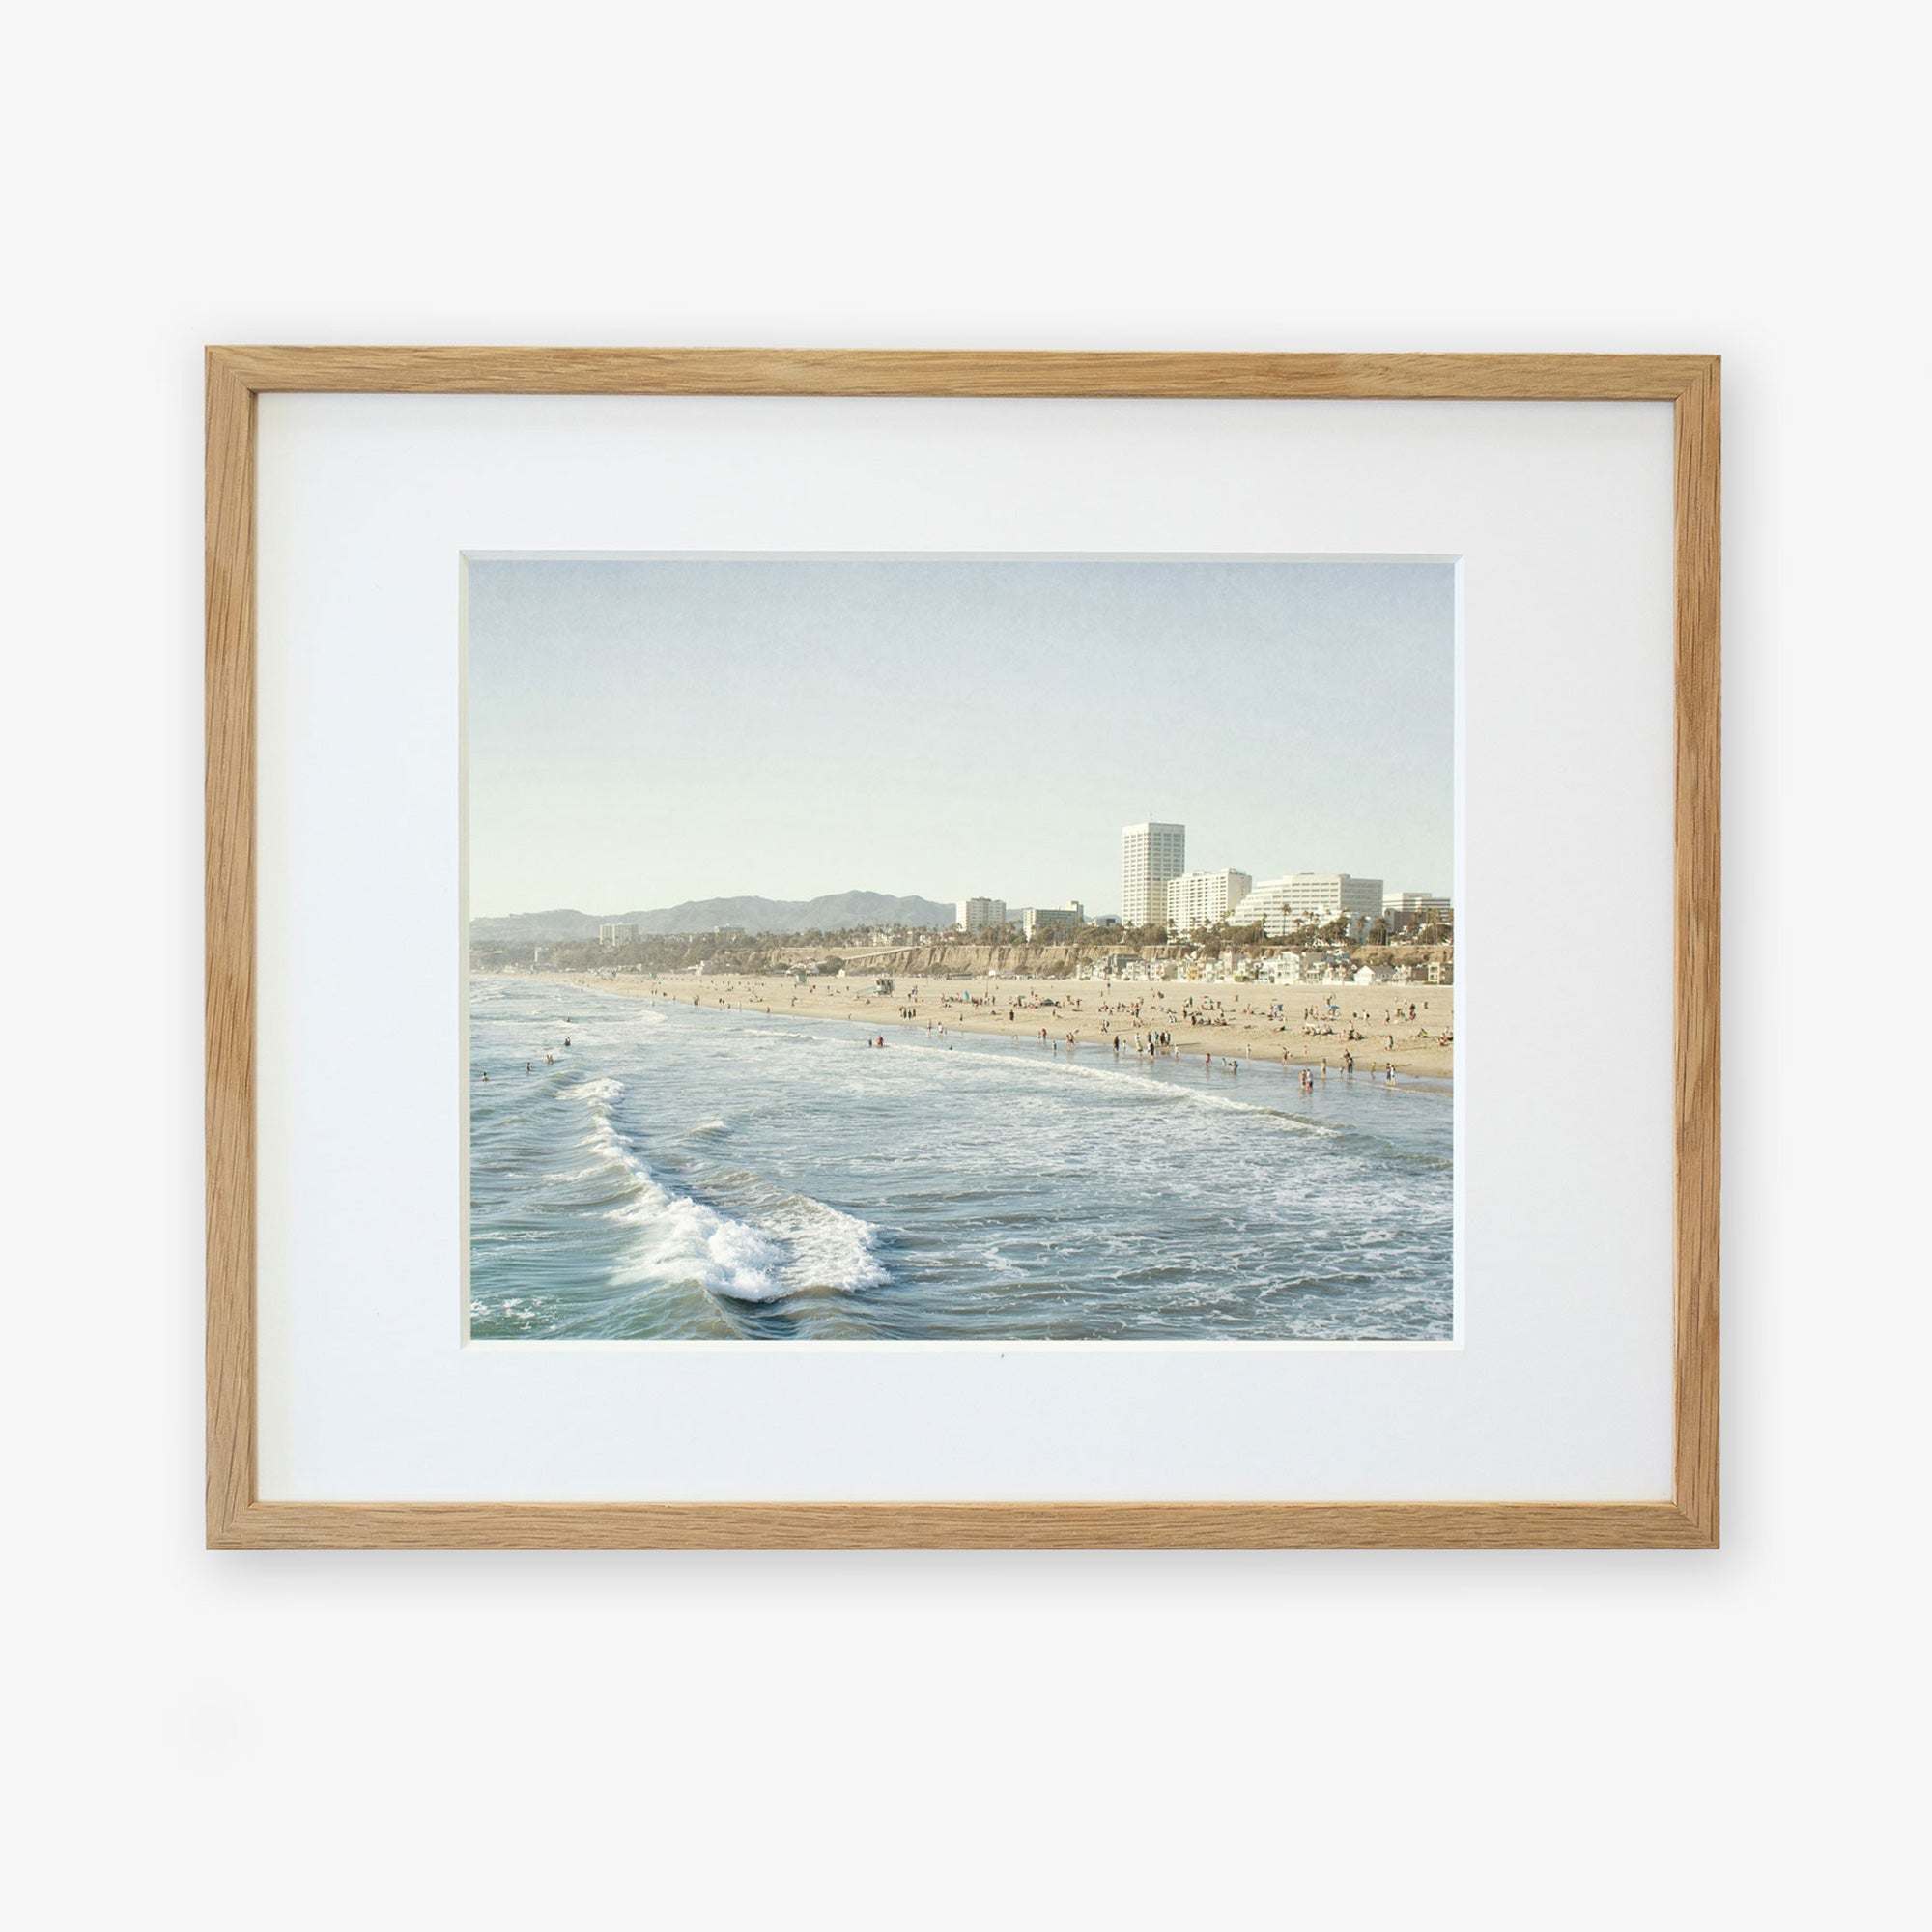 Framed photograph of a bustling beach scene with waves crashing along the shoreline at Santa Monica Pier and a crowded sandy beach, set against a backdrop of a city skyline by Offley Green in their Santa Monica Print, 'Santa Monica Seaside'.